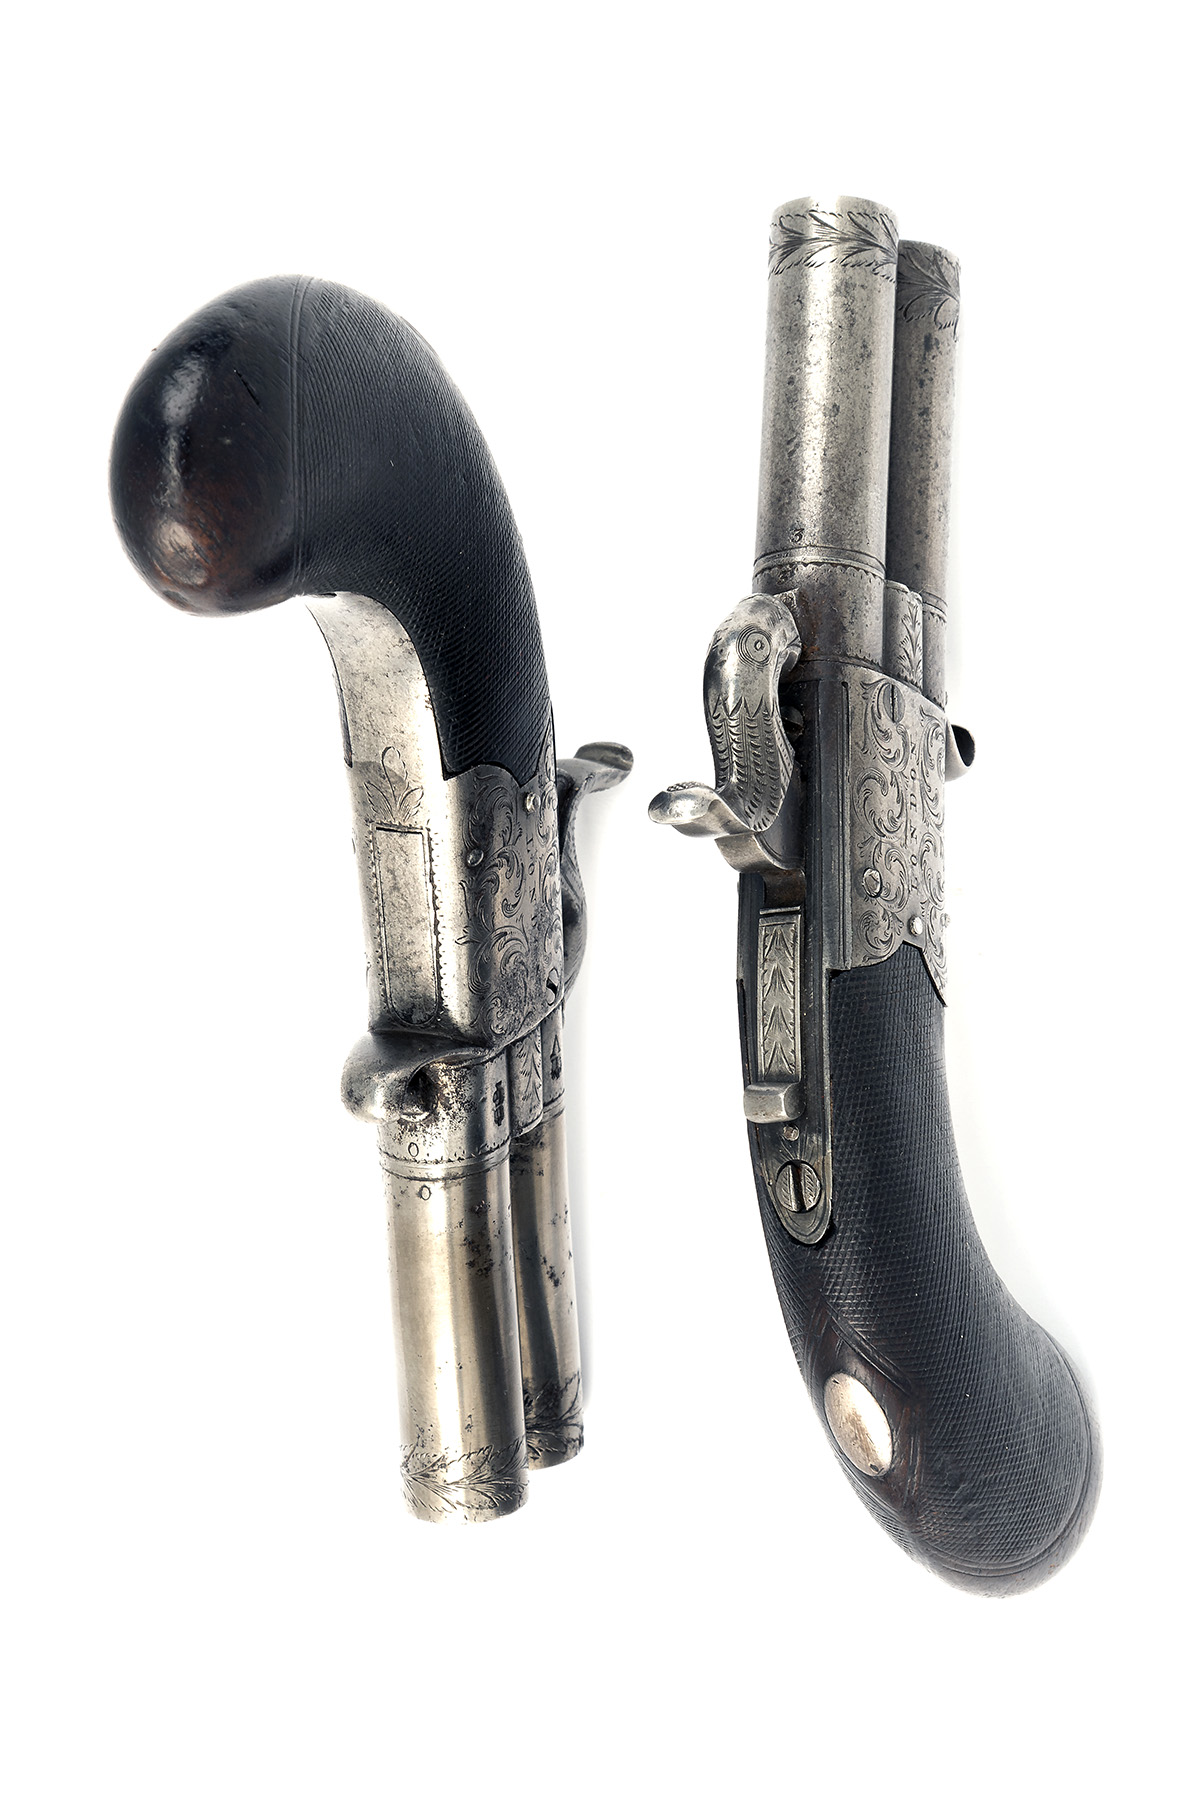 A CASED PAIR OF 80-BORE PERCUSSION TURN-OVER POCKET PISTOLS BY COLLINS OF LONDON CIRCA 1840, no - Image 4 of 4